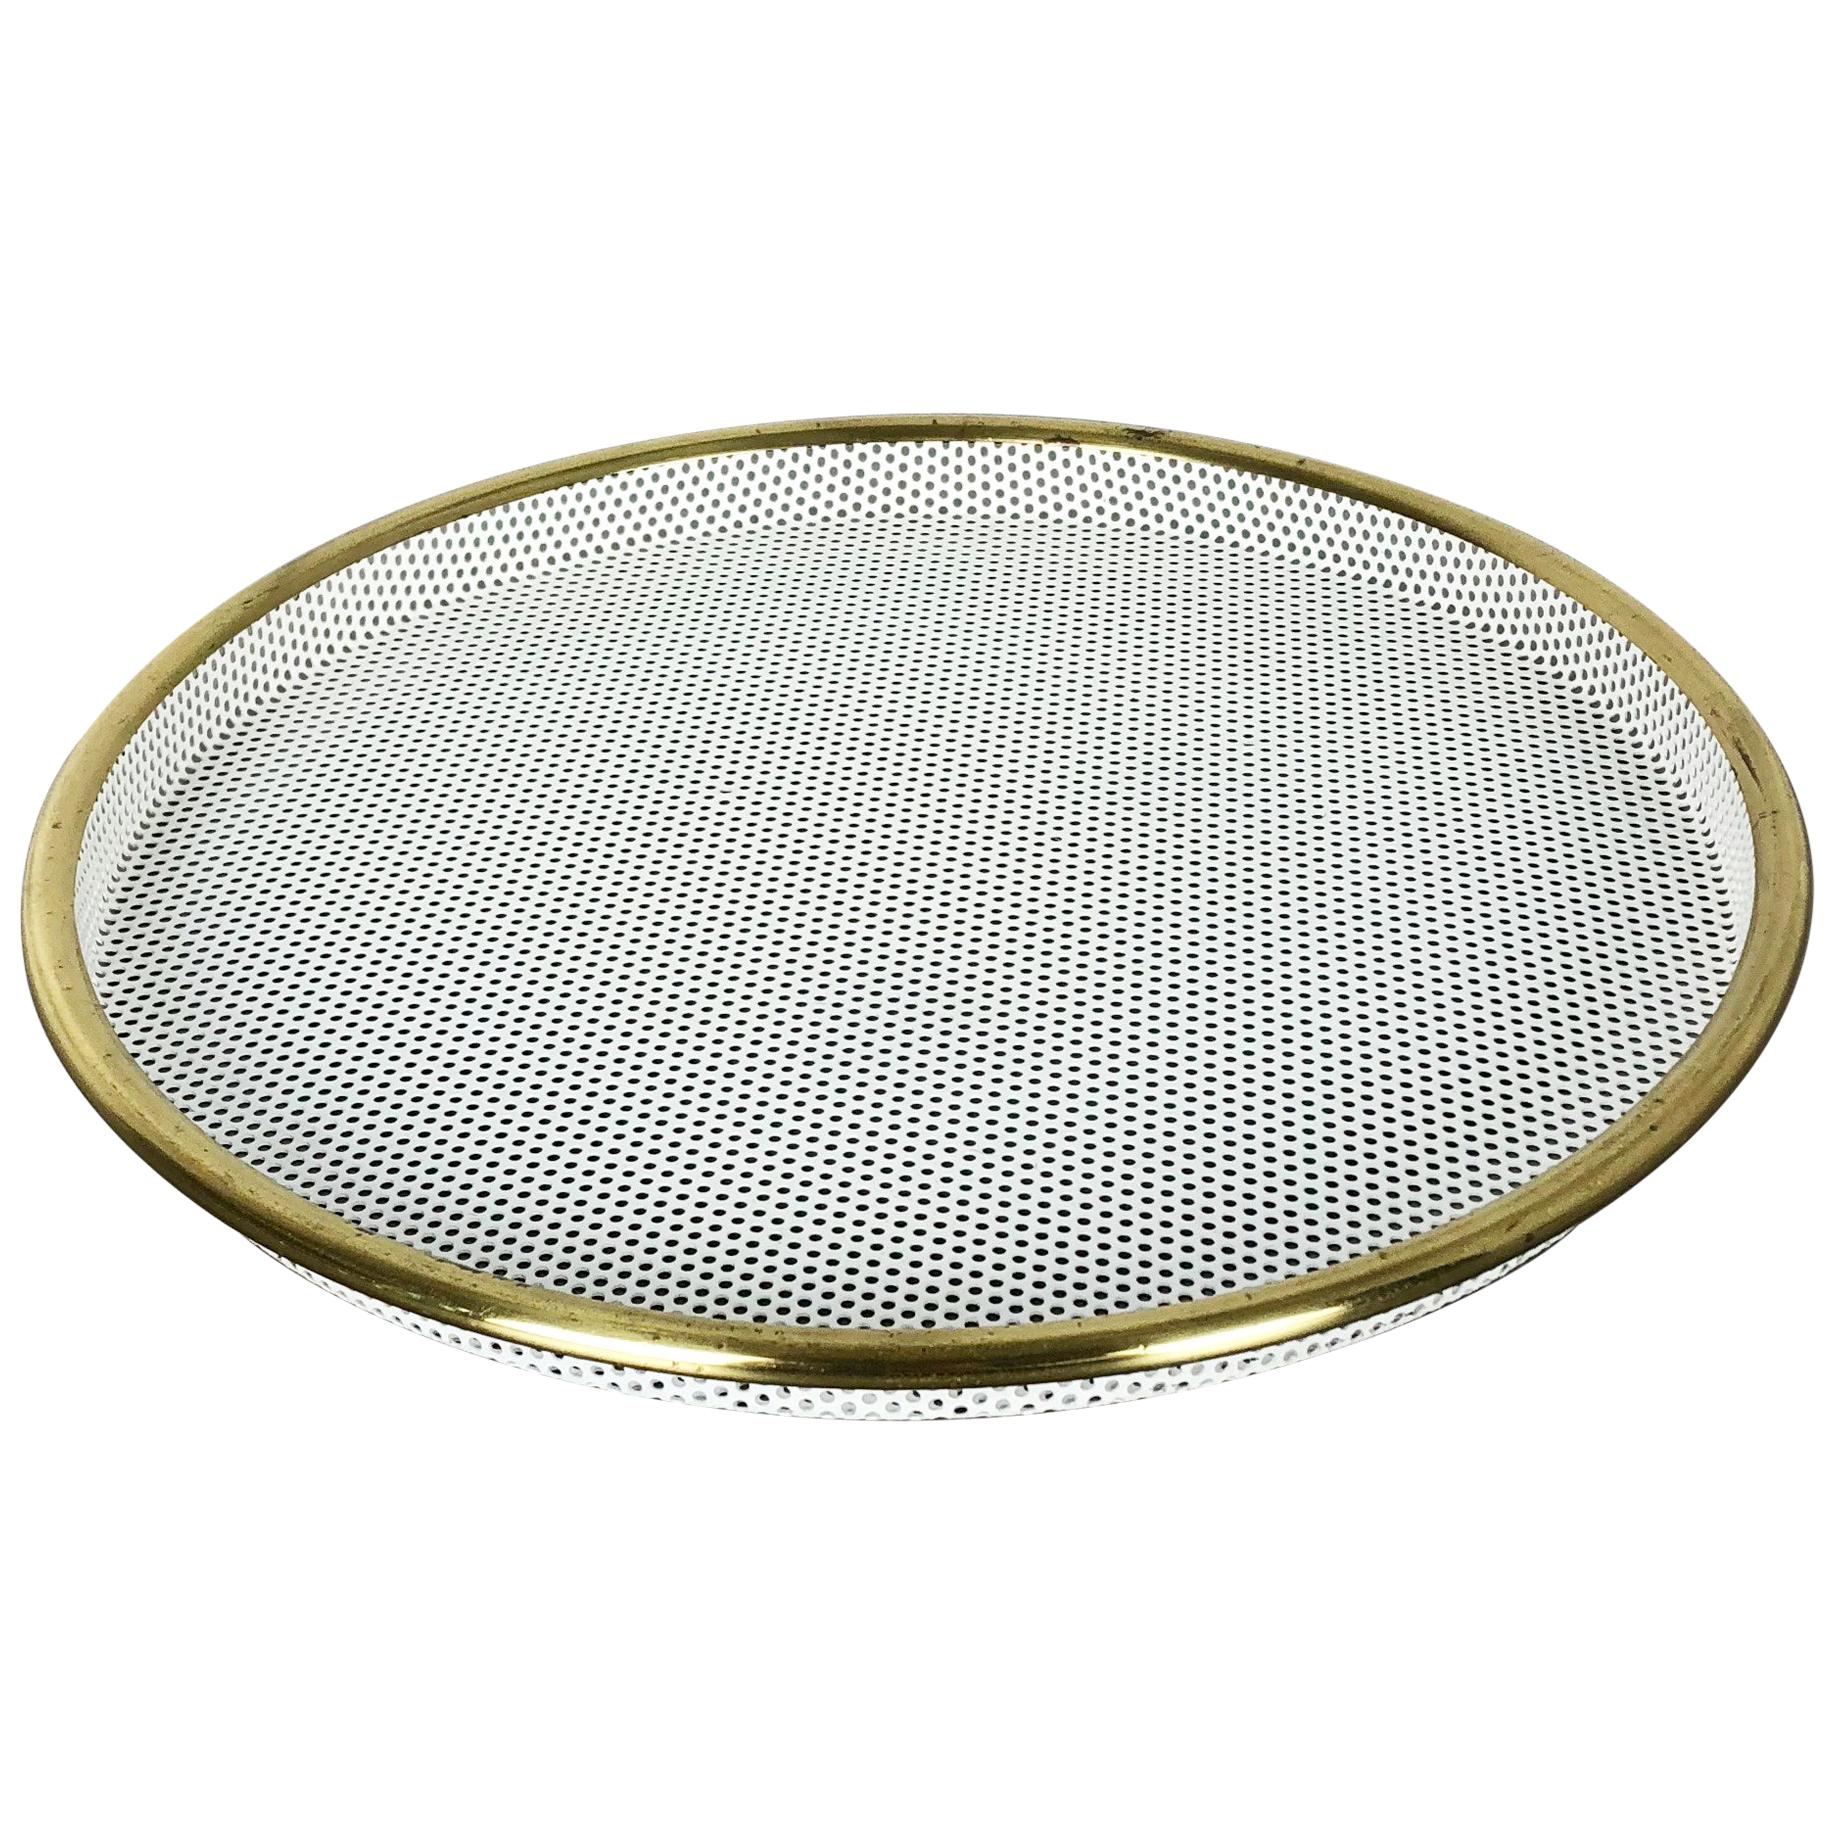 Original French Metal Tray "Rigituelle" in Style of Mathieu Mategot, 1960s